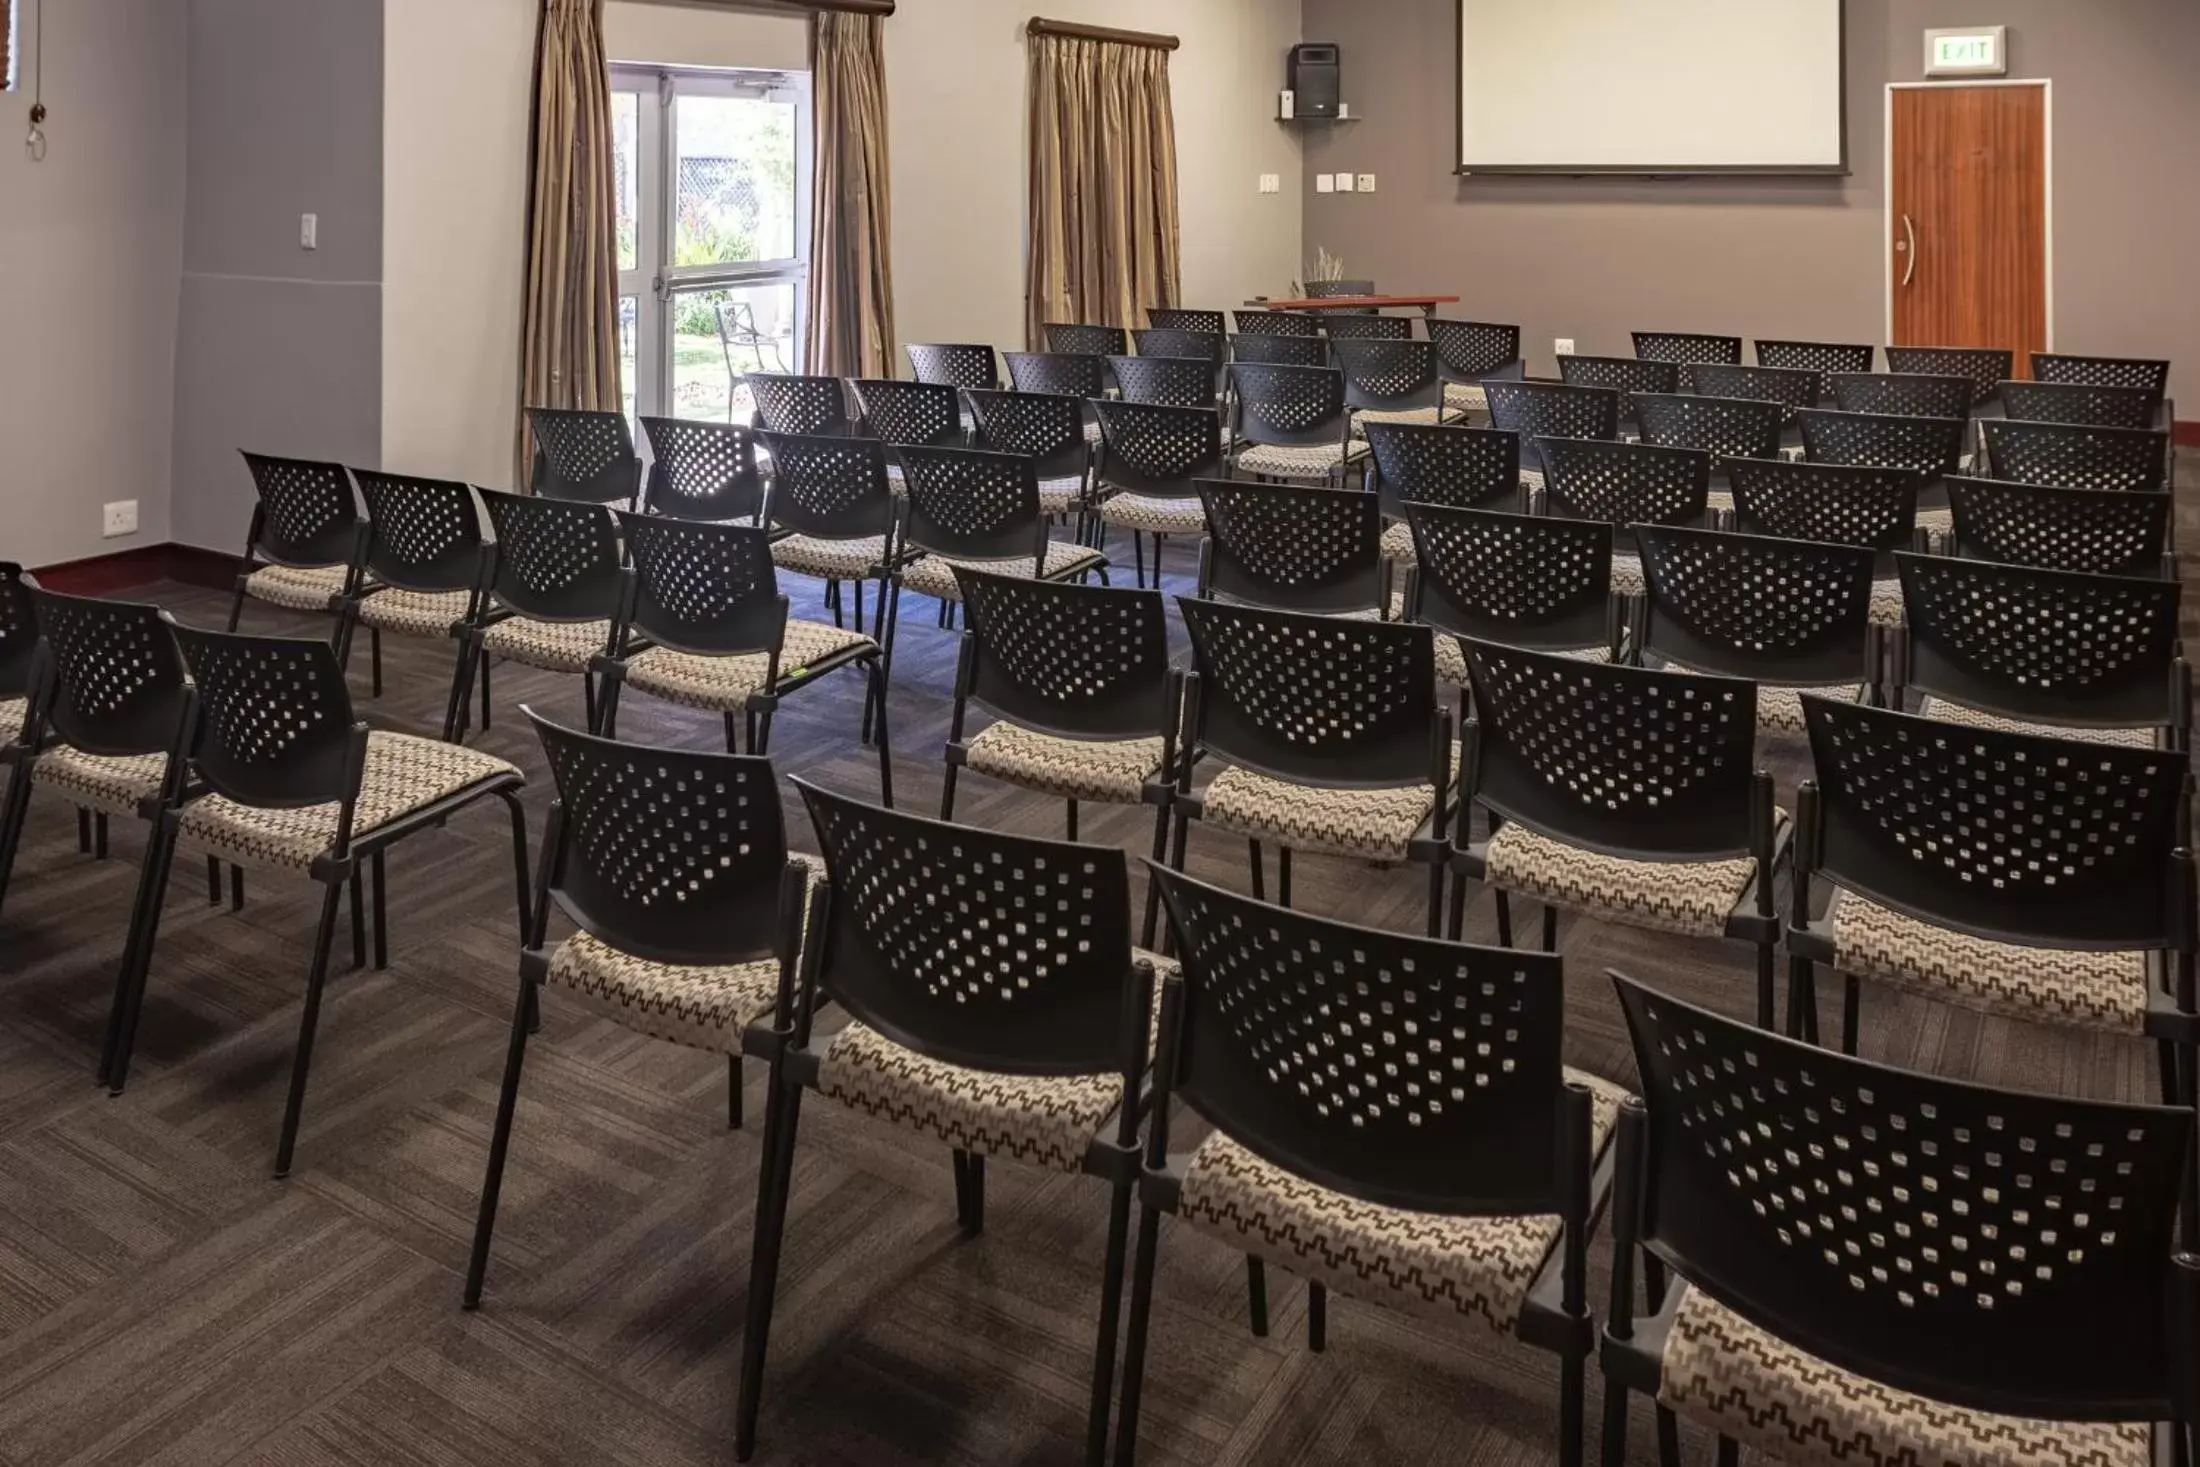 Business facilities in City Lodge Hotel Durban